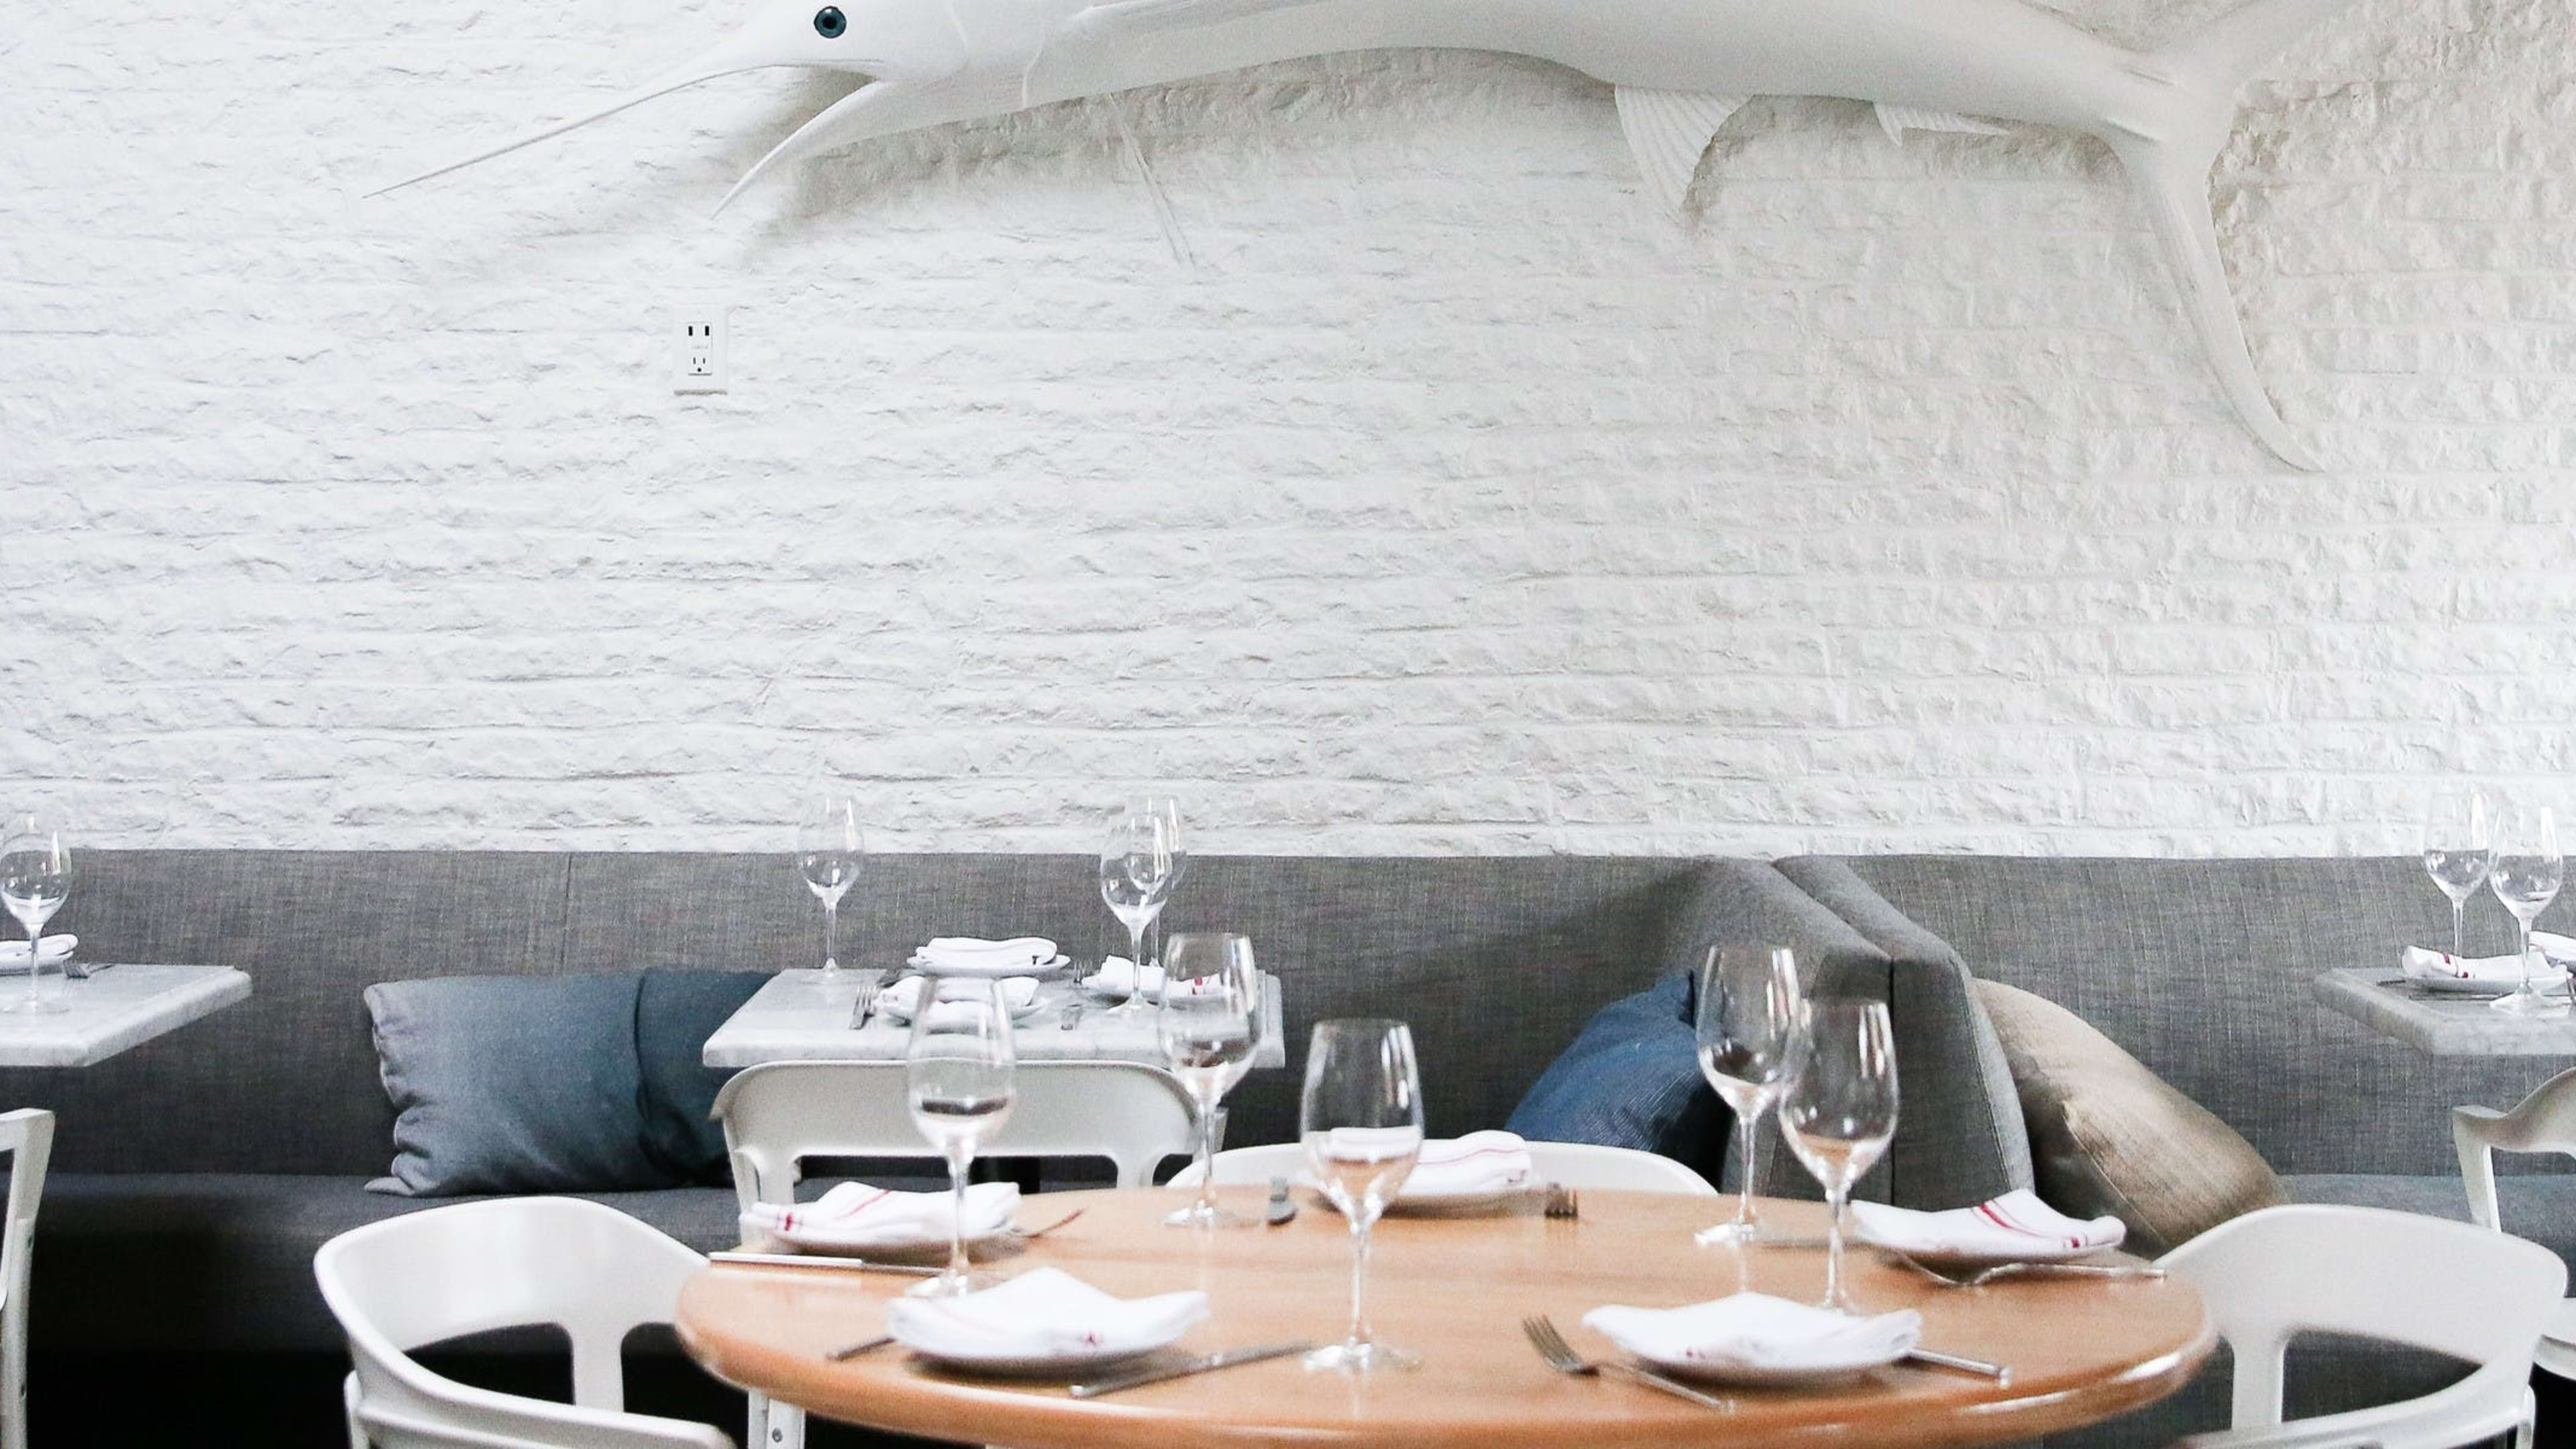 The Cool List: 11 Restaurants That Aren’t “Hot” But Are Definitely Still Cool image